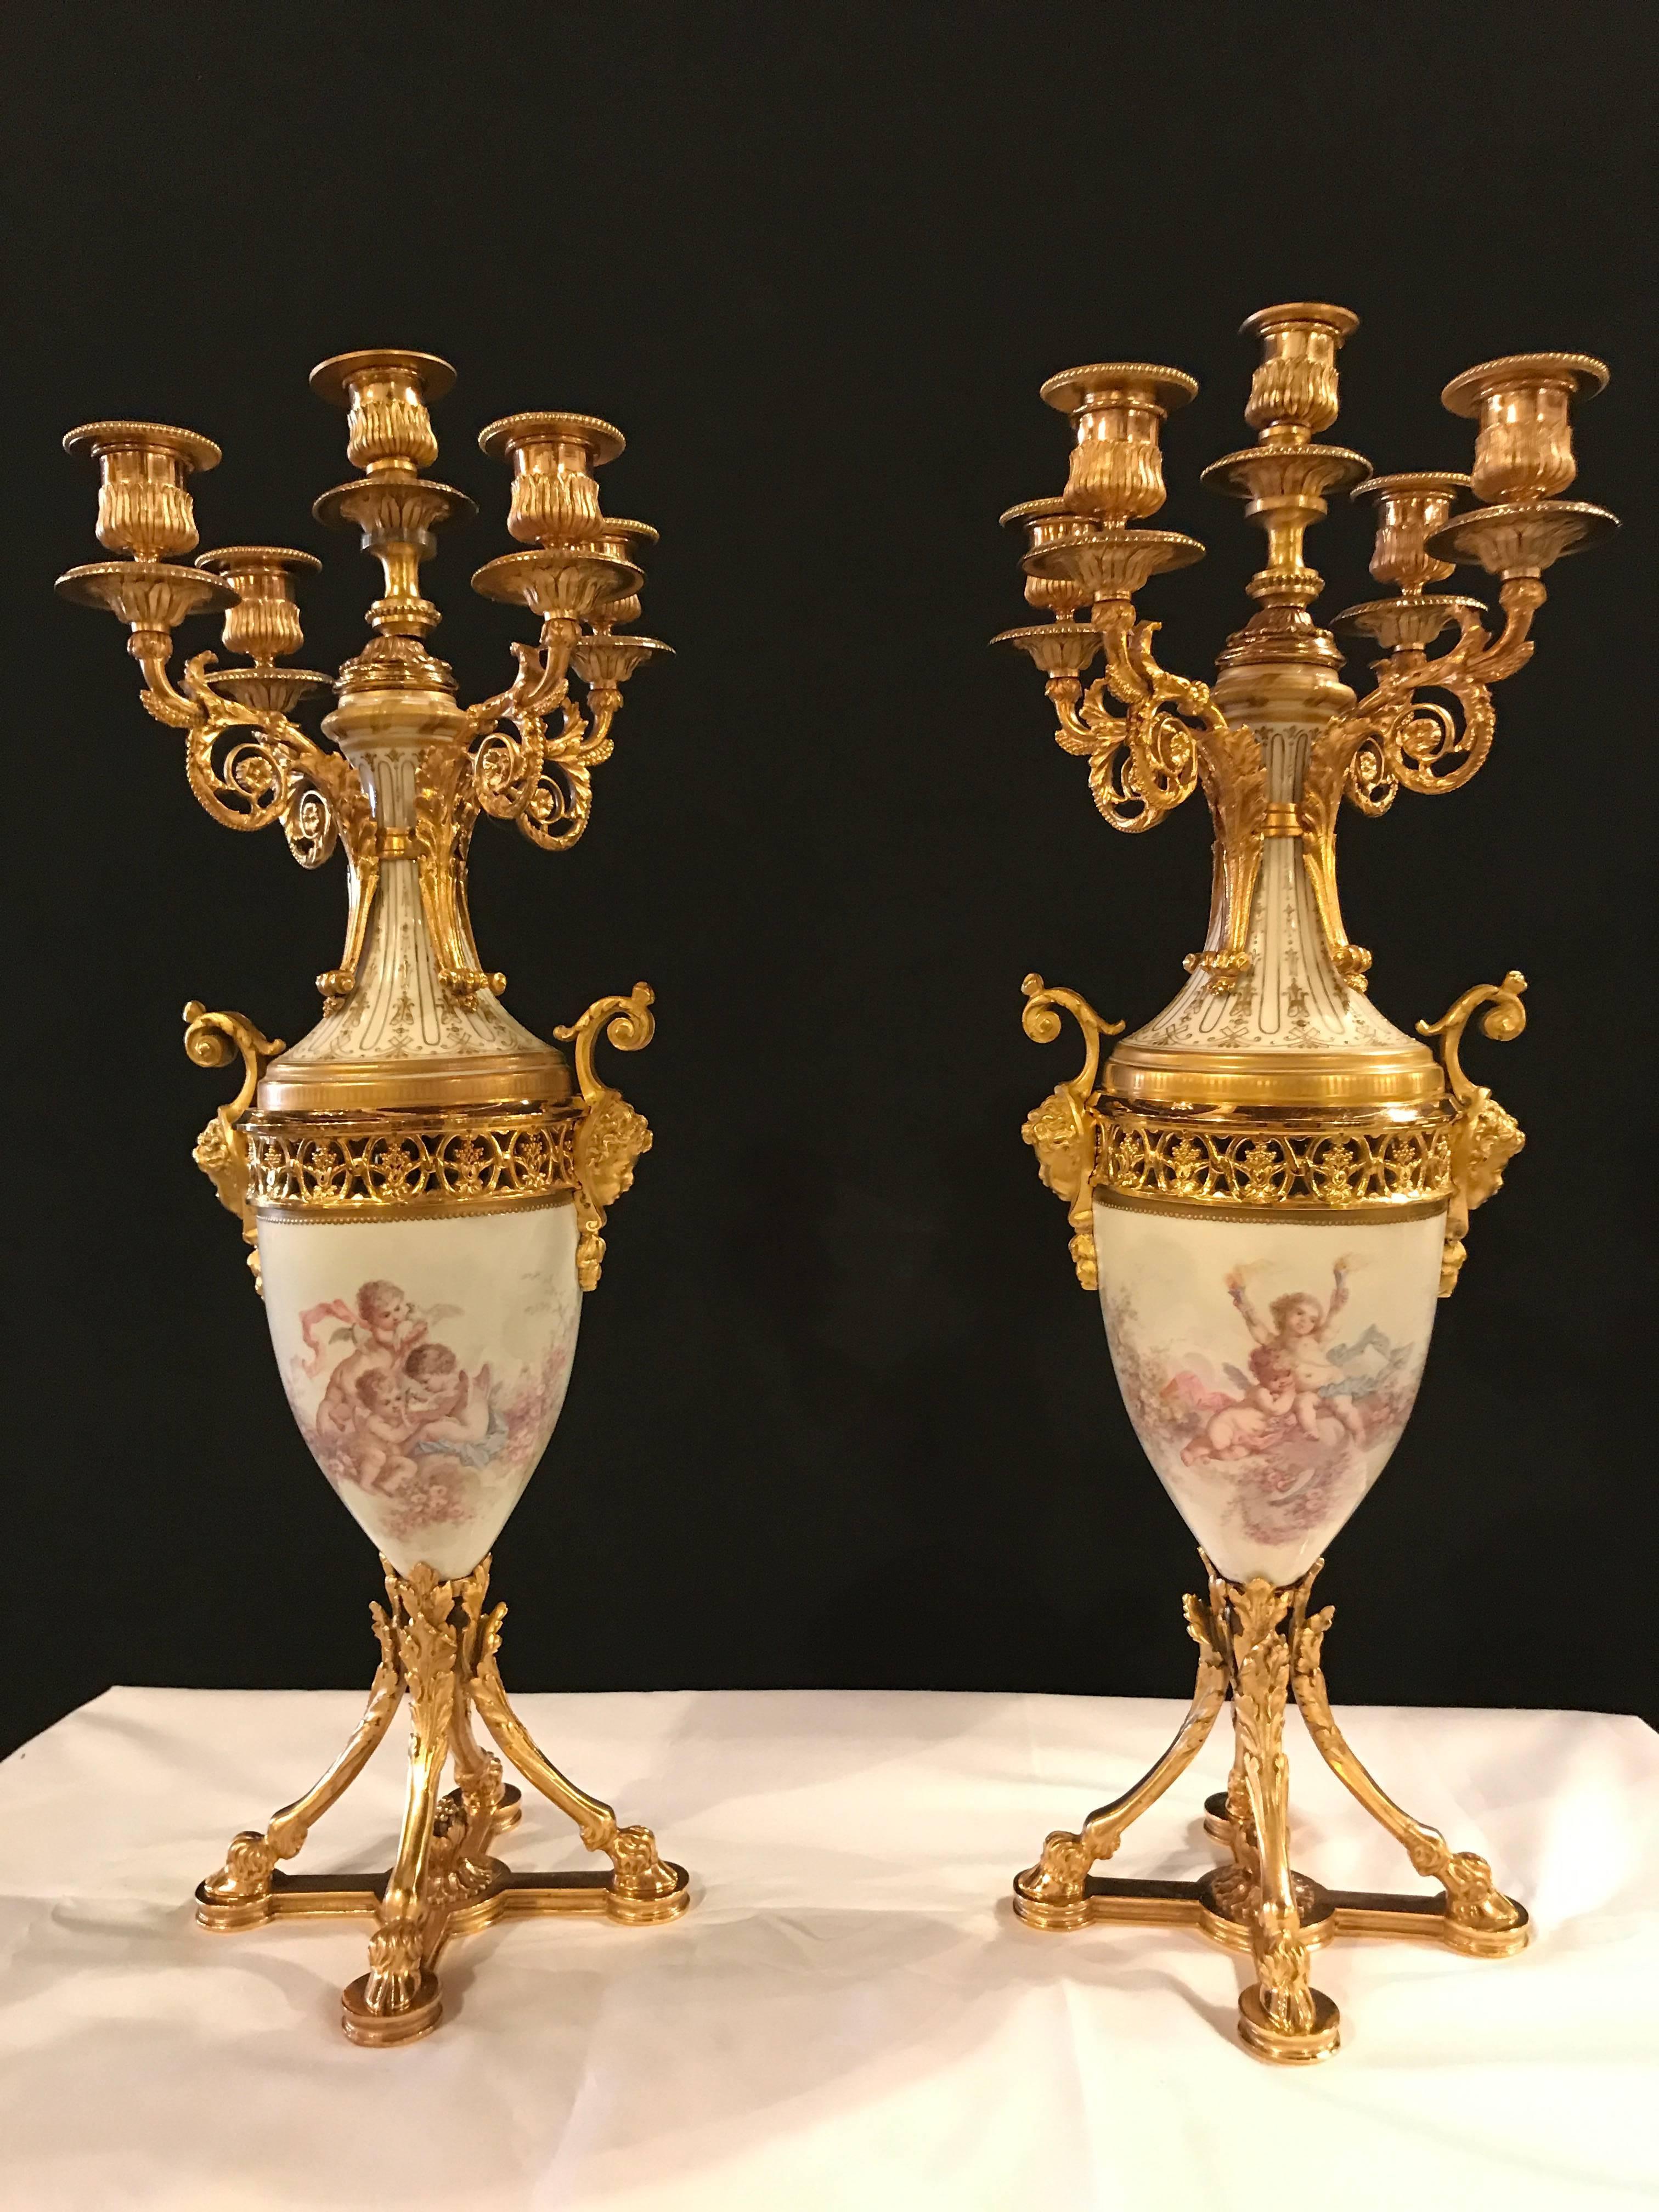 A fine pair of gilt bronze and porcelain candelabra with cherub painting. Each having five candleholders of bronze form with scrolling arms leading to a centre urn shaped porcelain paint of cherubs playing with love birds. The urns sitting on a four